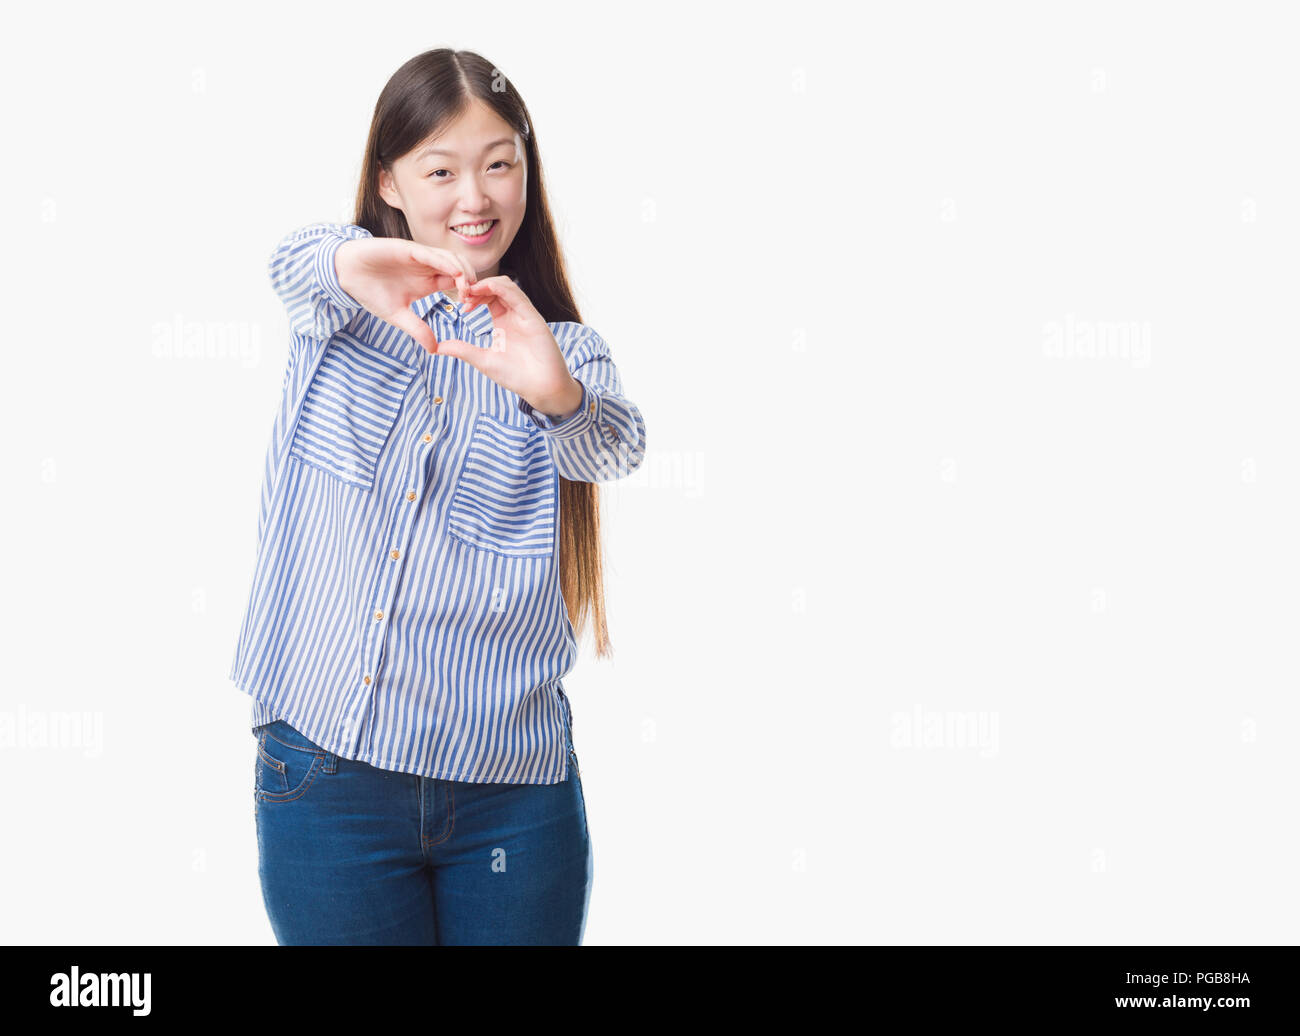 Young Chinese woman over isolated background smiling in love showing heart symbol and shape with hands. Romantic concept. Stock Photo